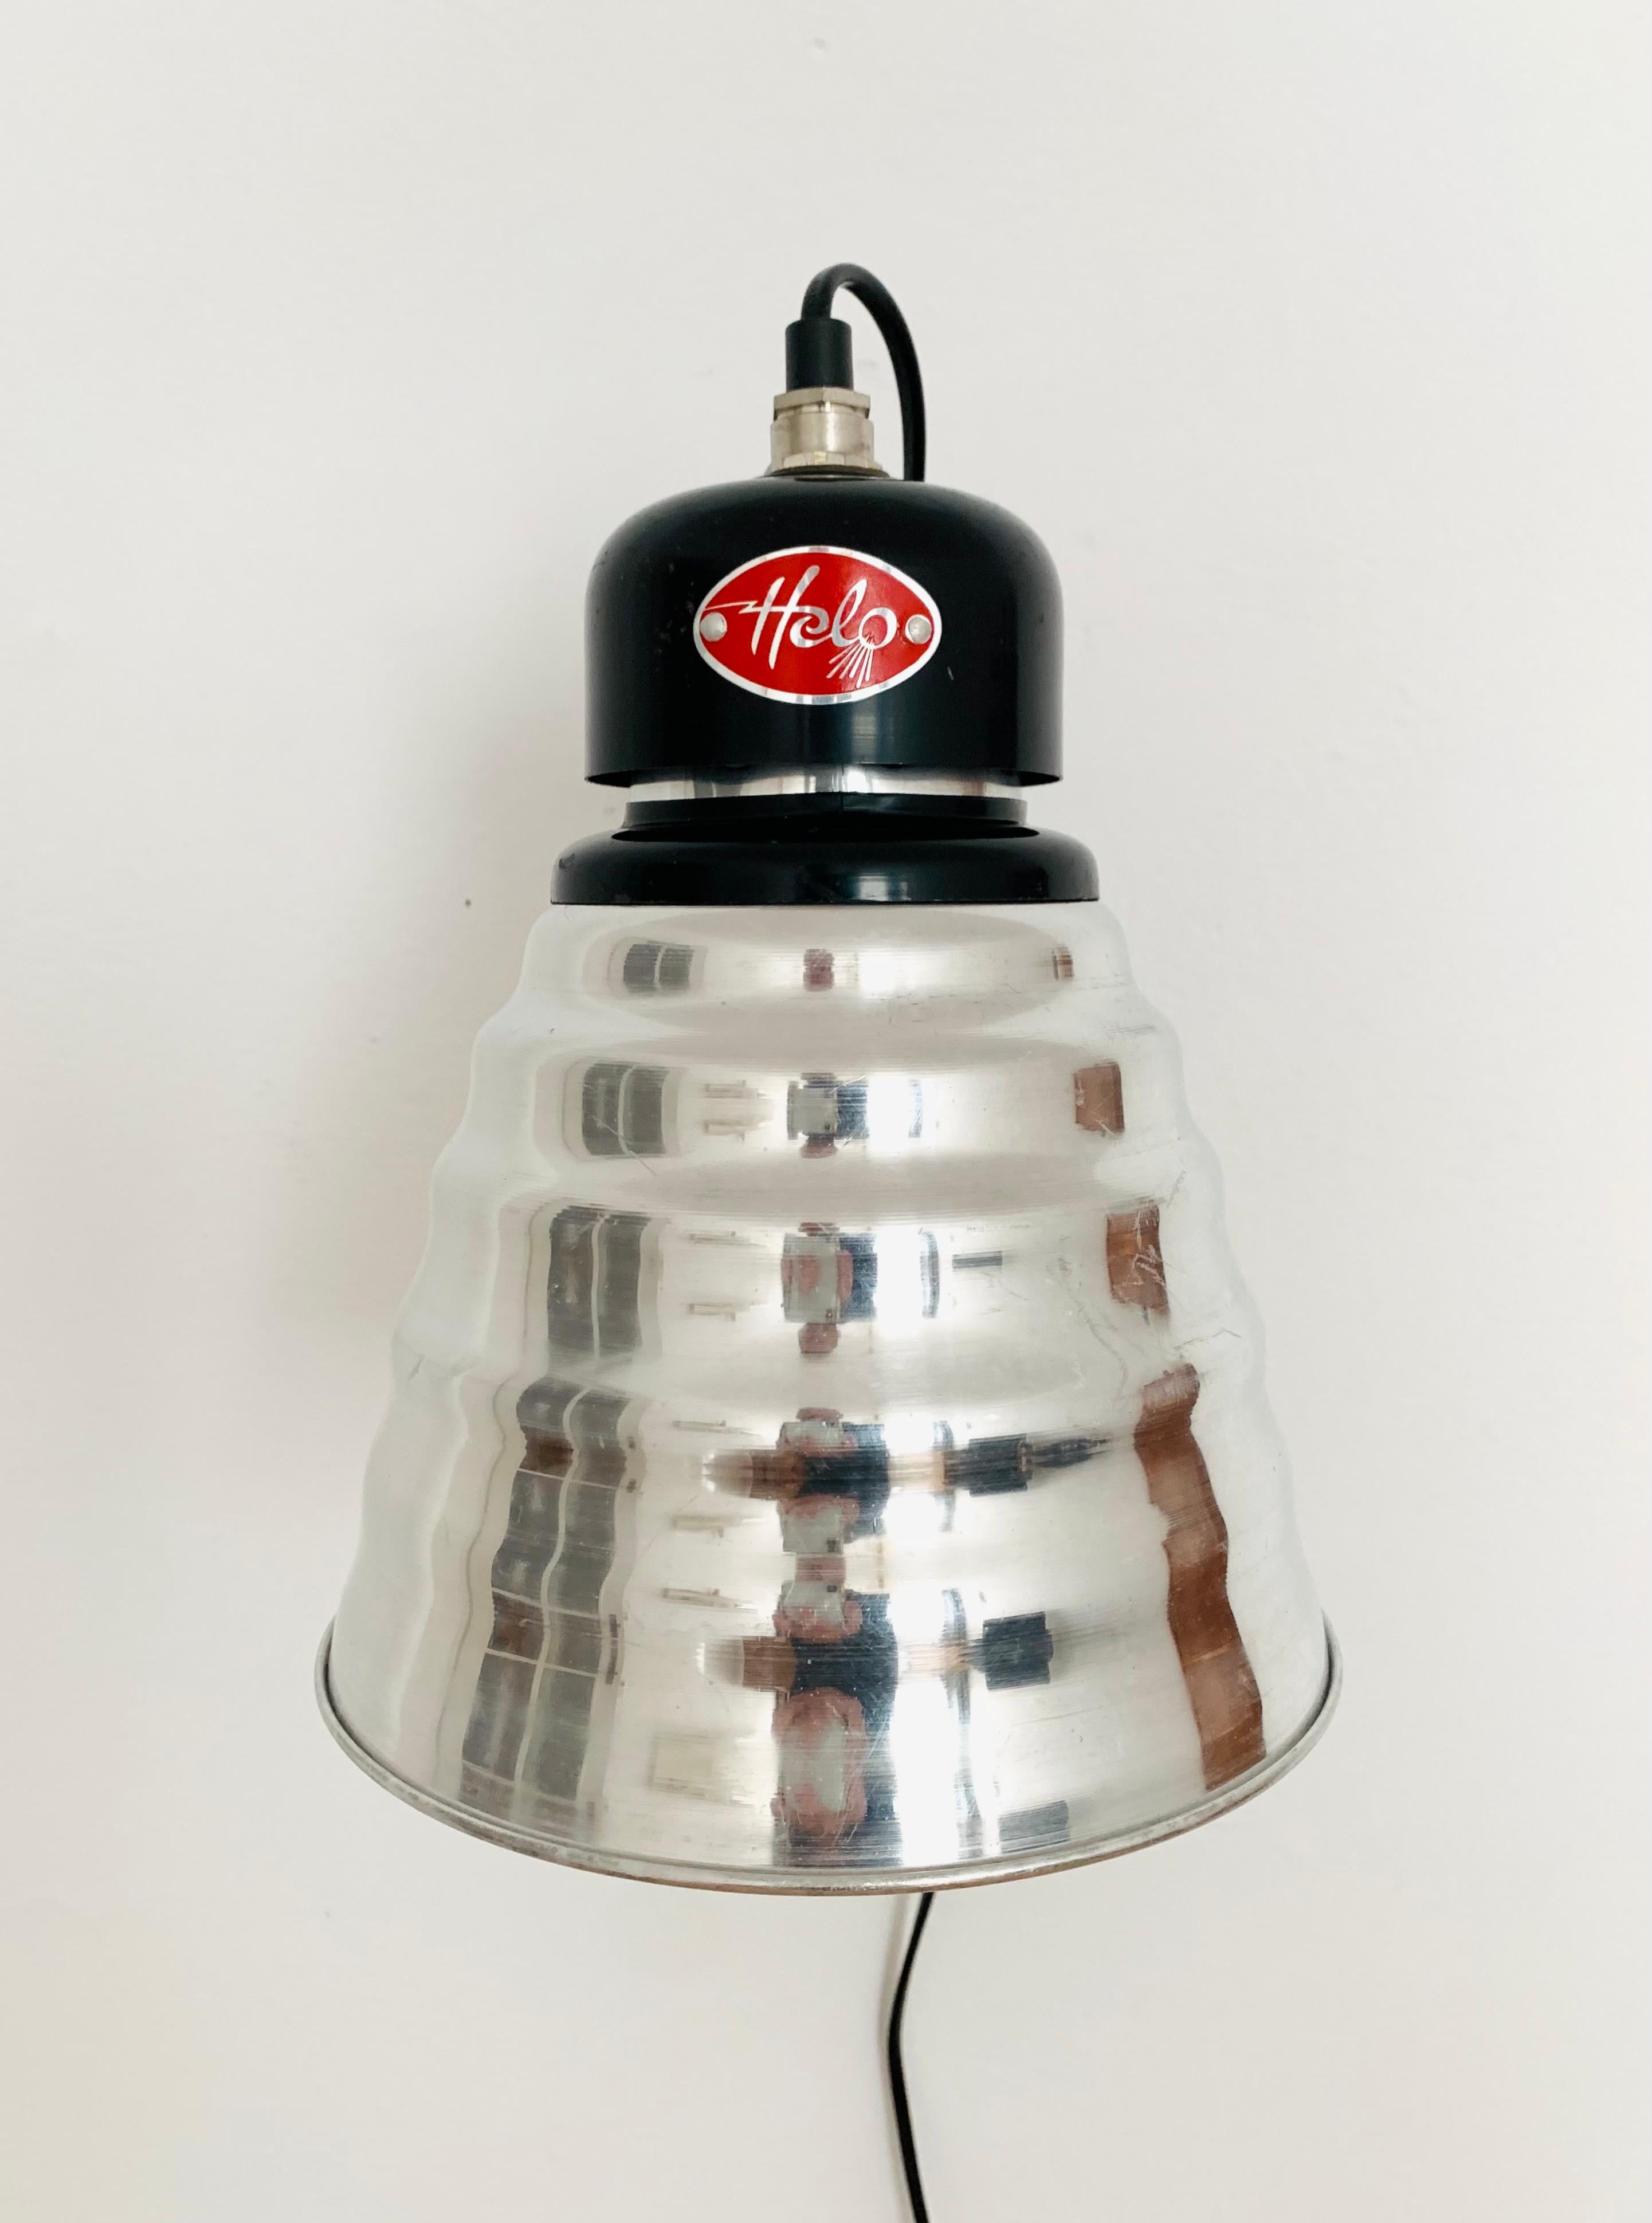 Mid-20th Century Industrial Wall Lamp from Helo